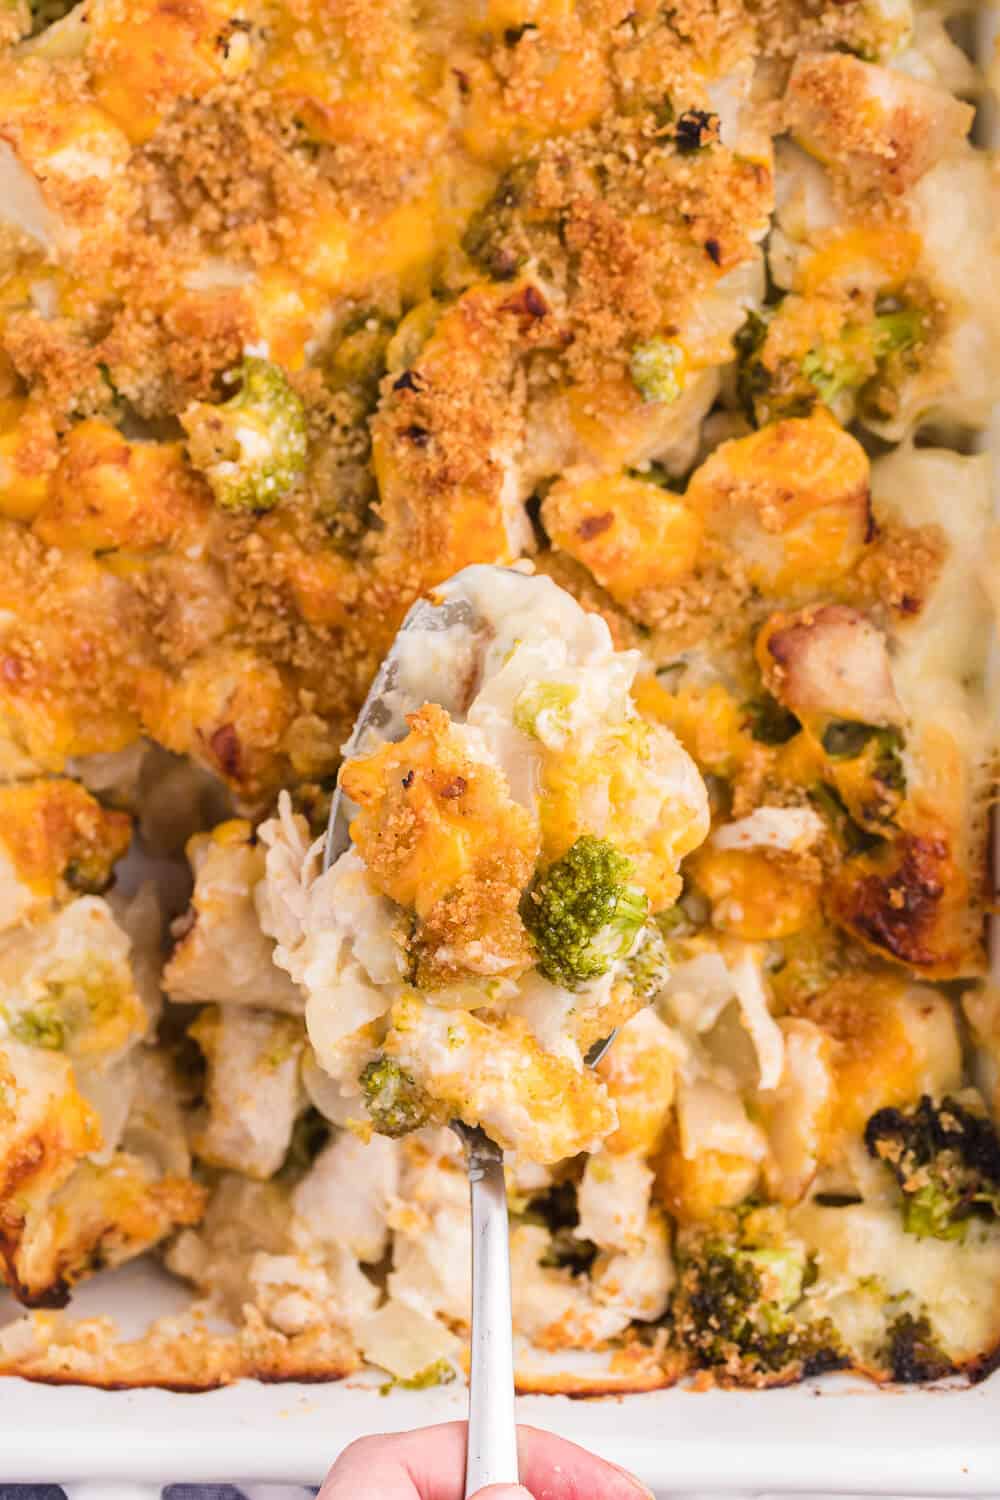 Chicken broccoli biscuit bake served on a spoon.